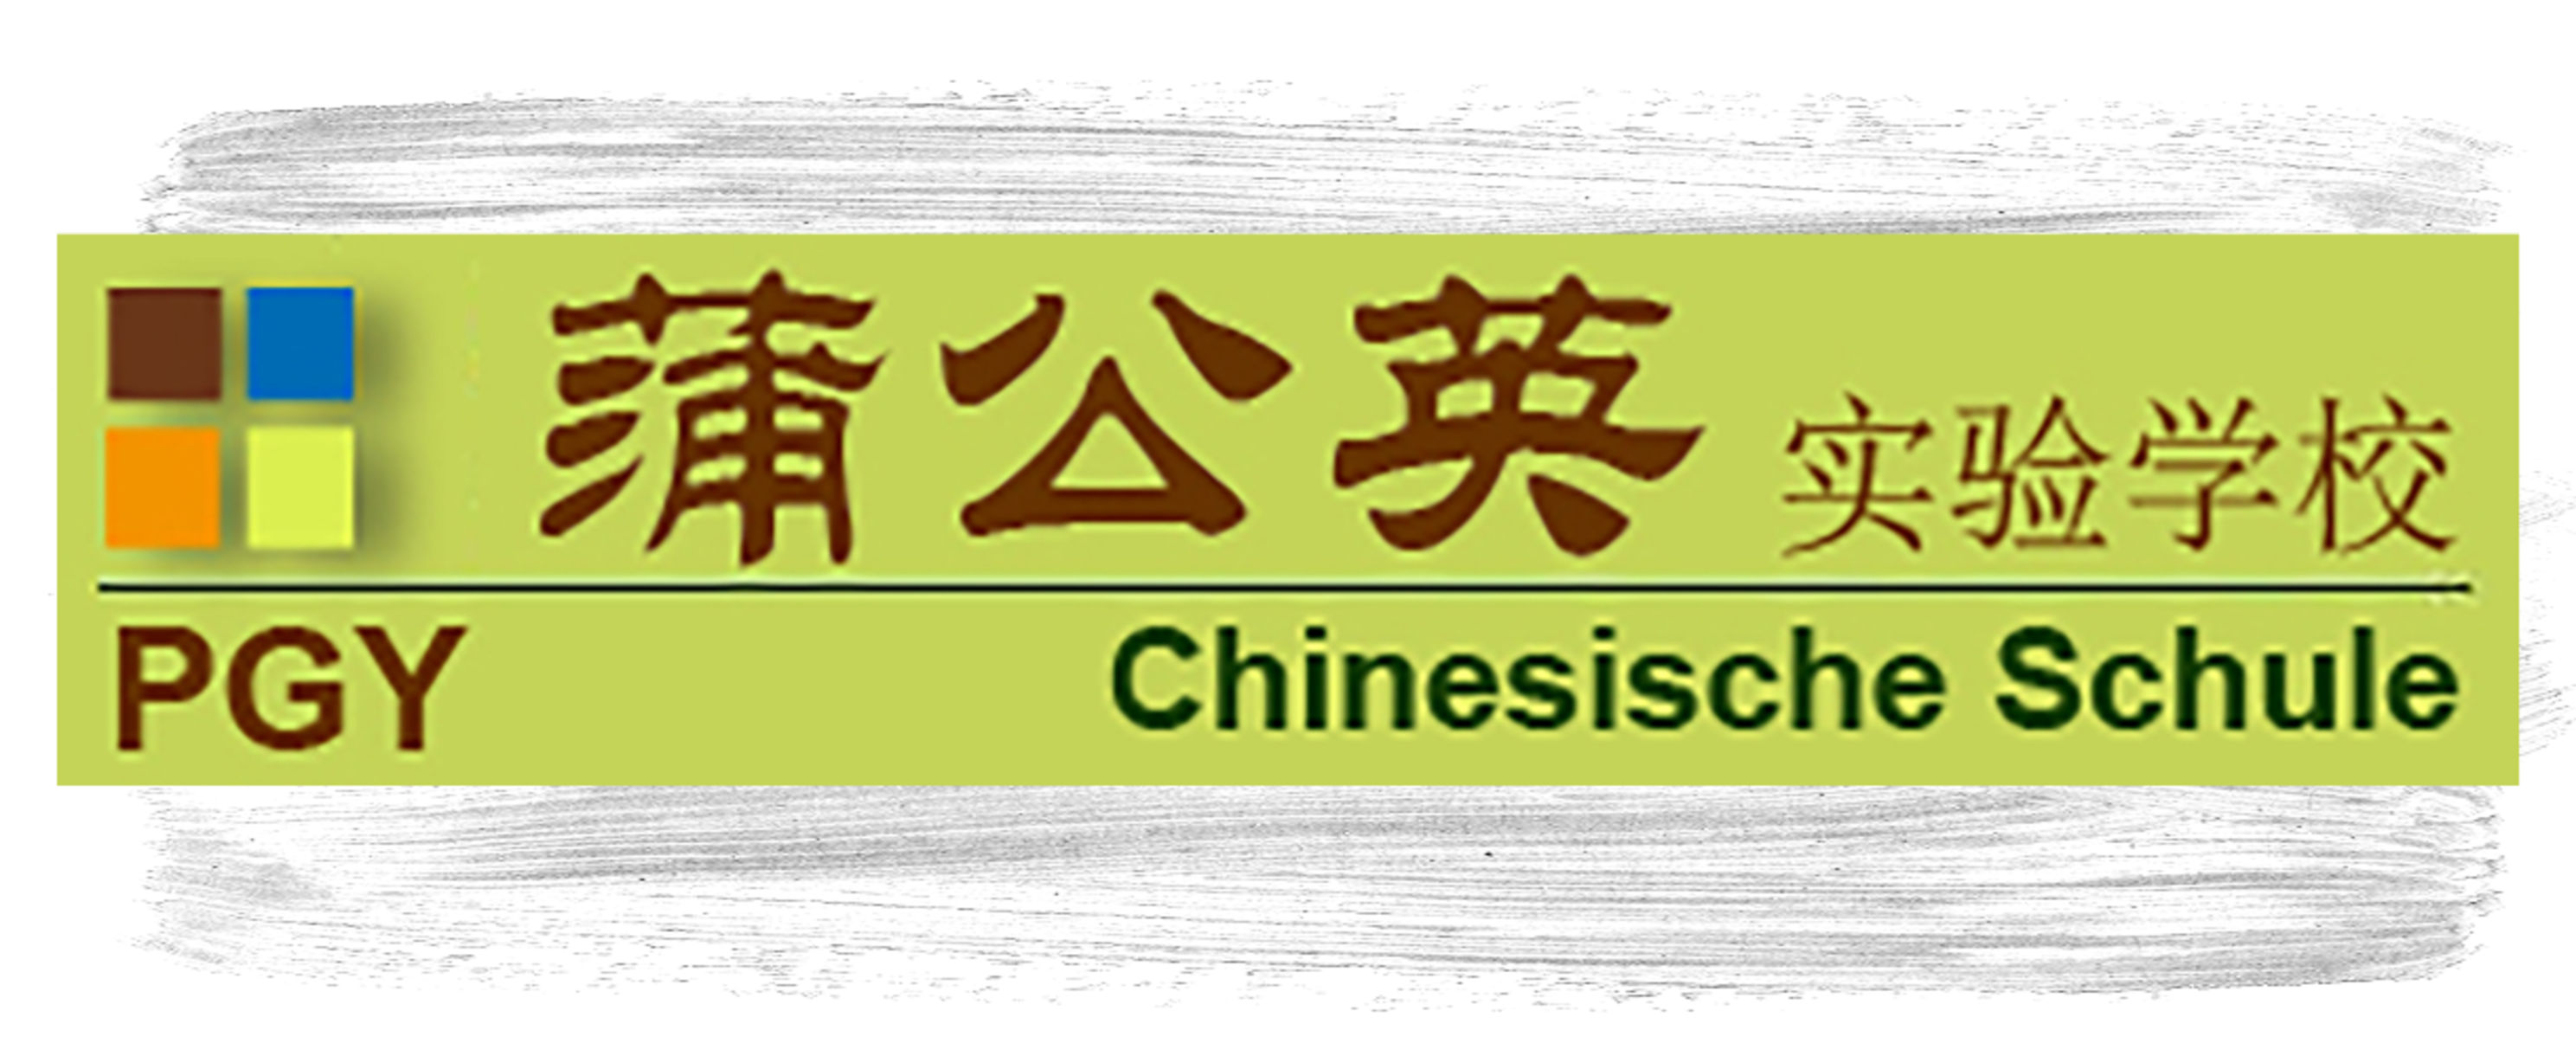 PGY Chinesische Schule